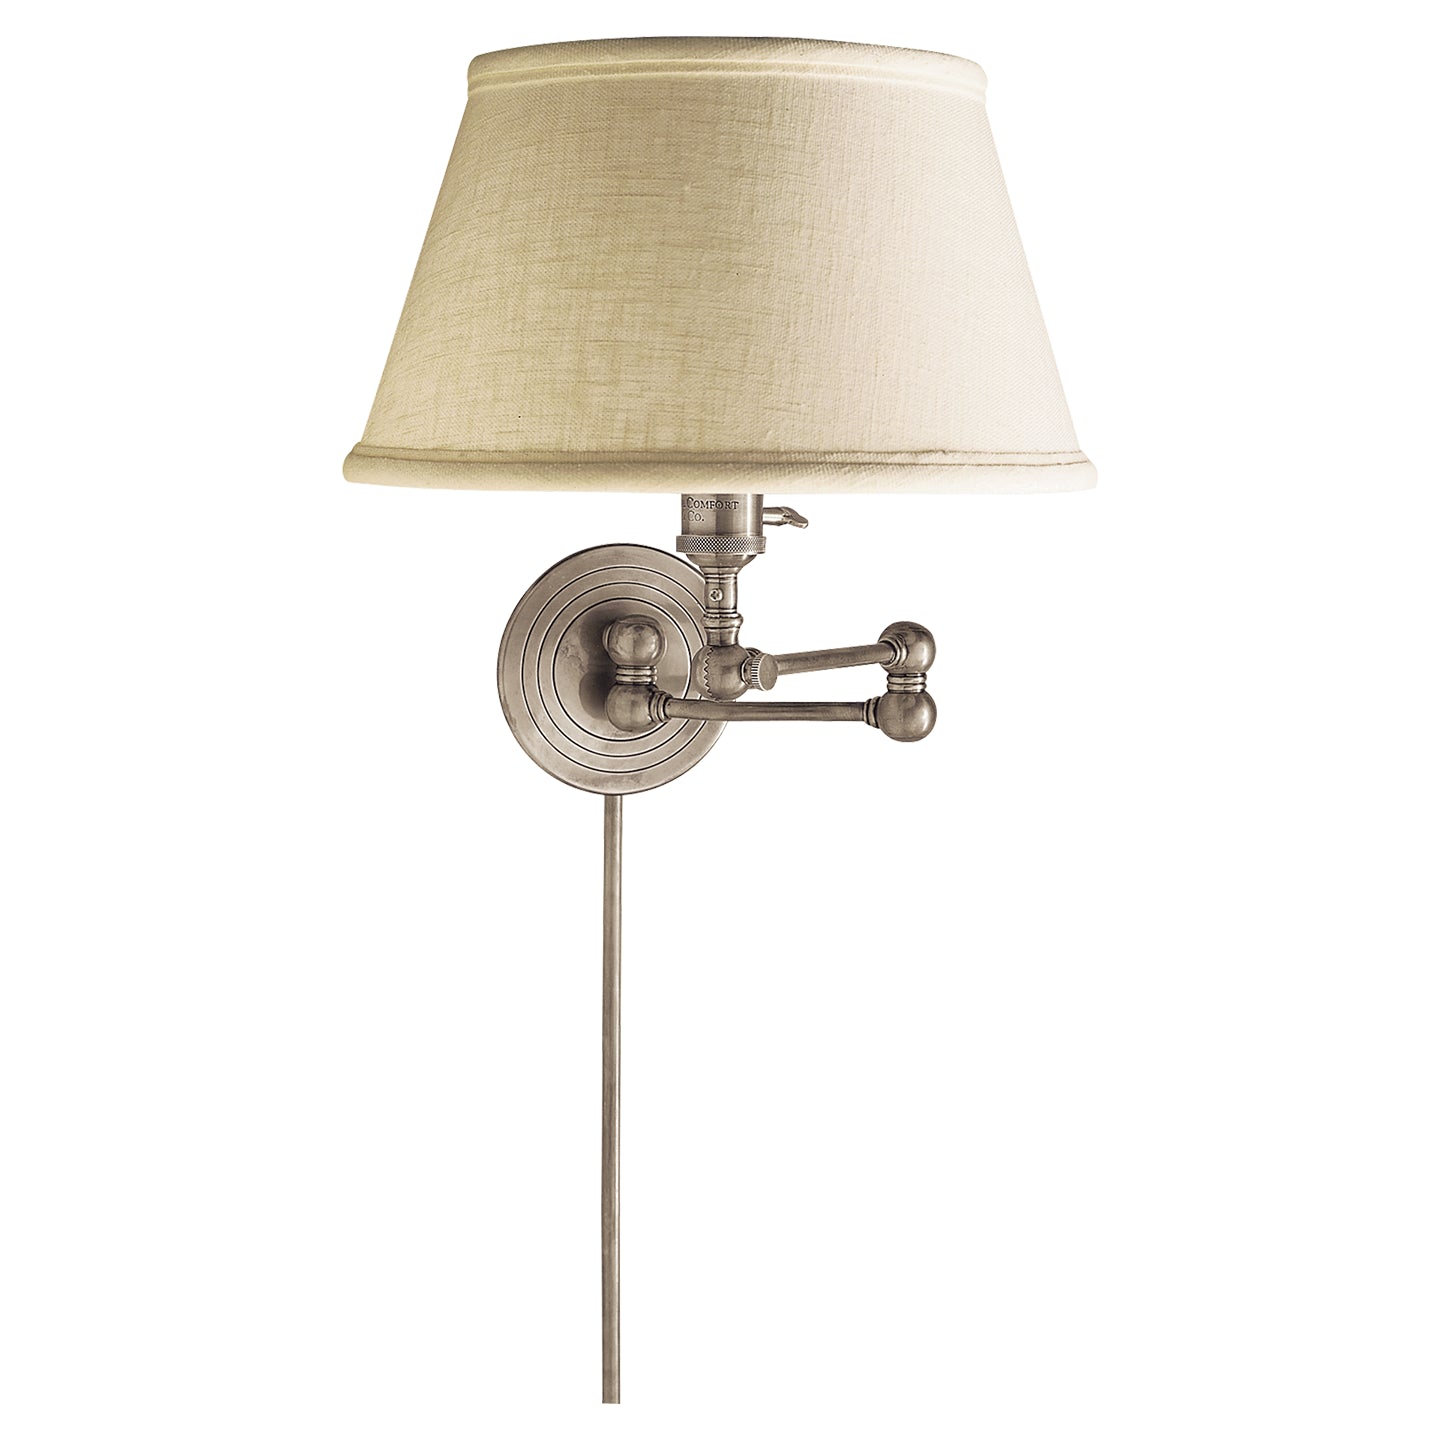 Visual Comfort Signature - SL 2920AN-L - One Light Wall Sconce - Boston Functional - Antique Nickel